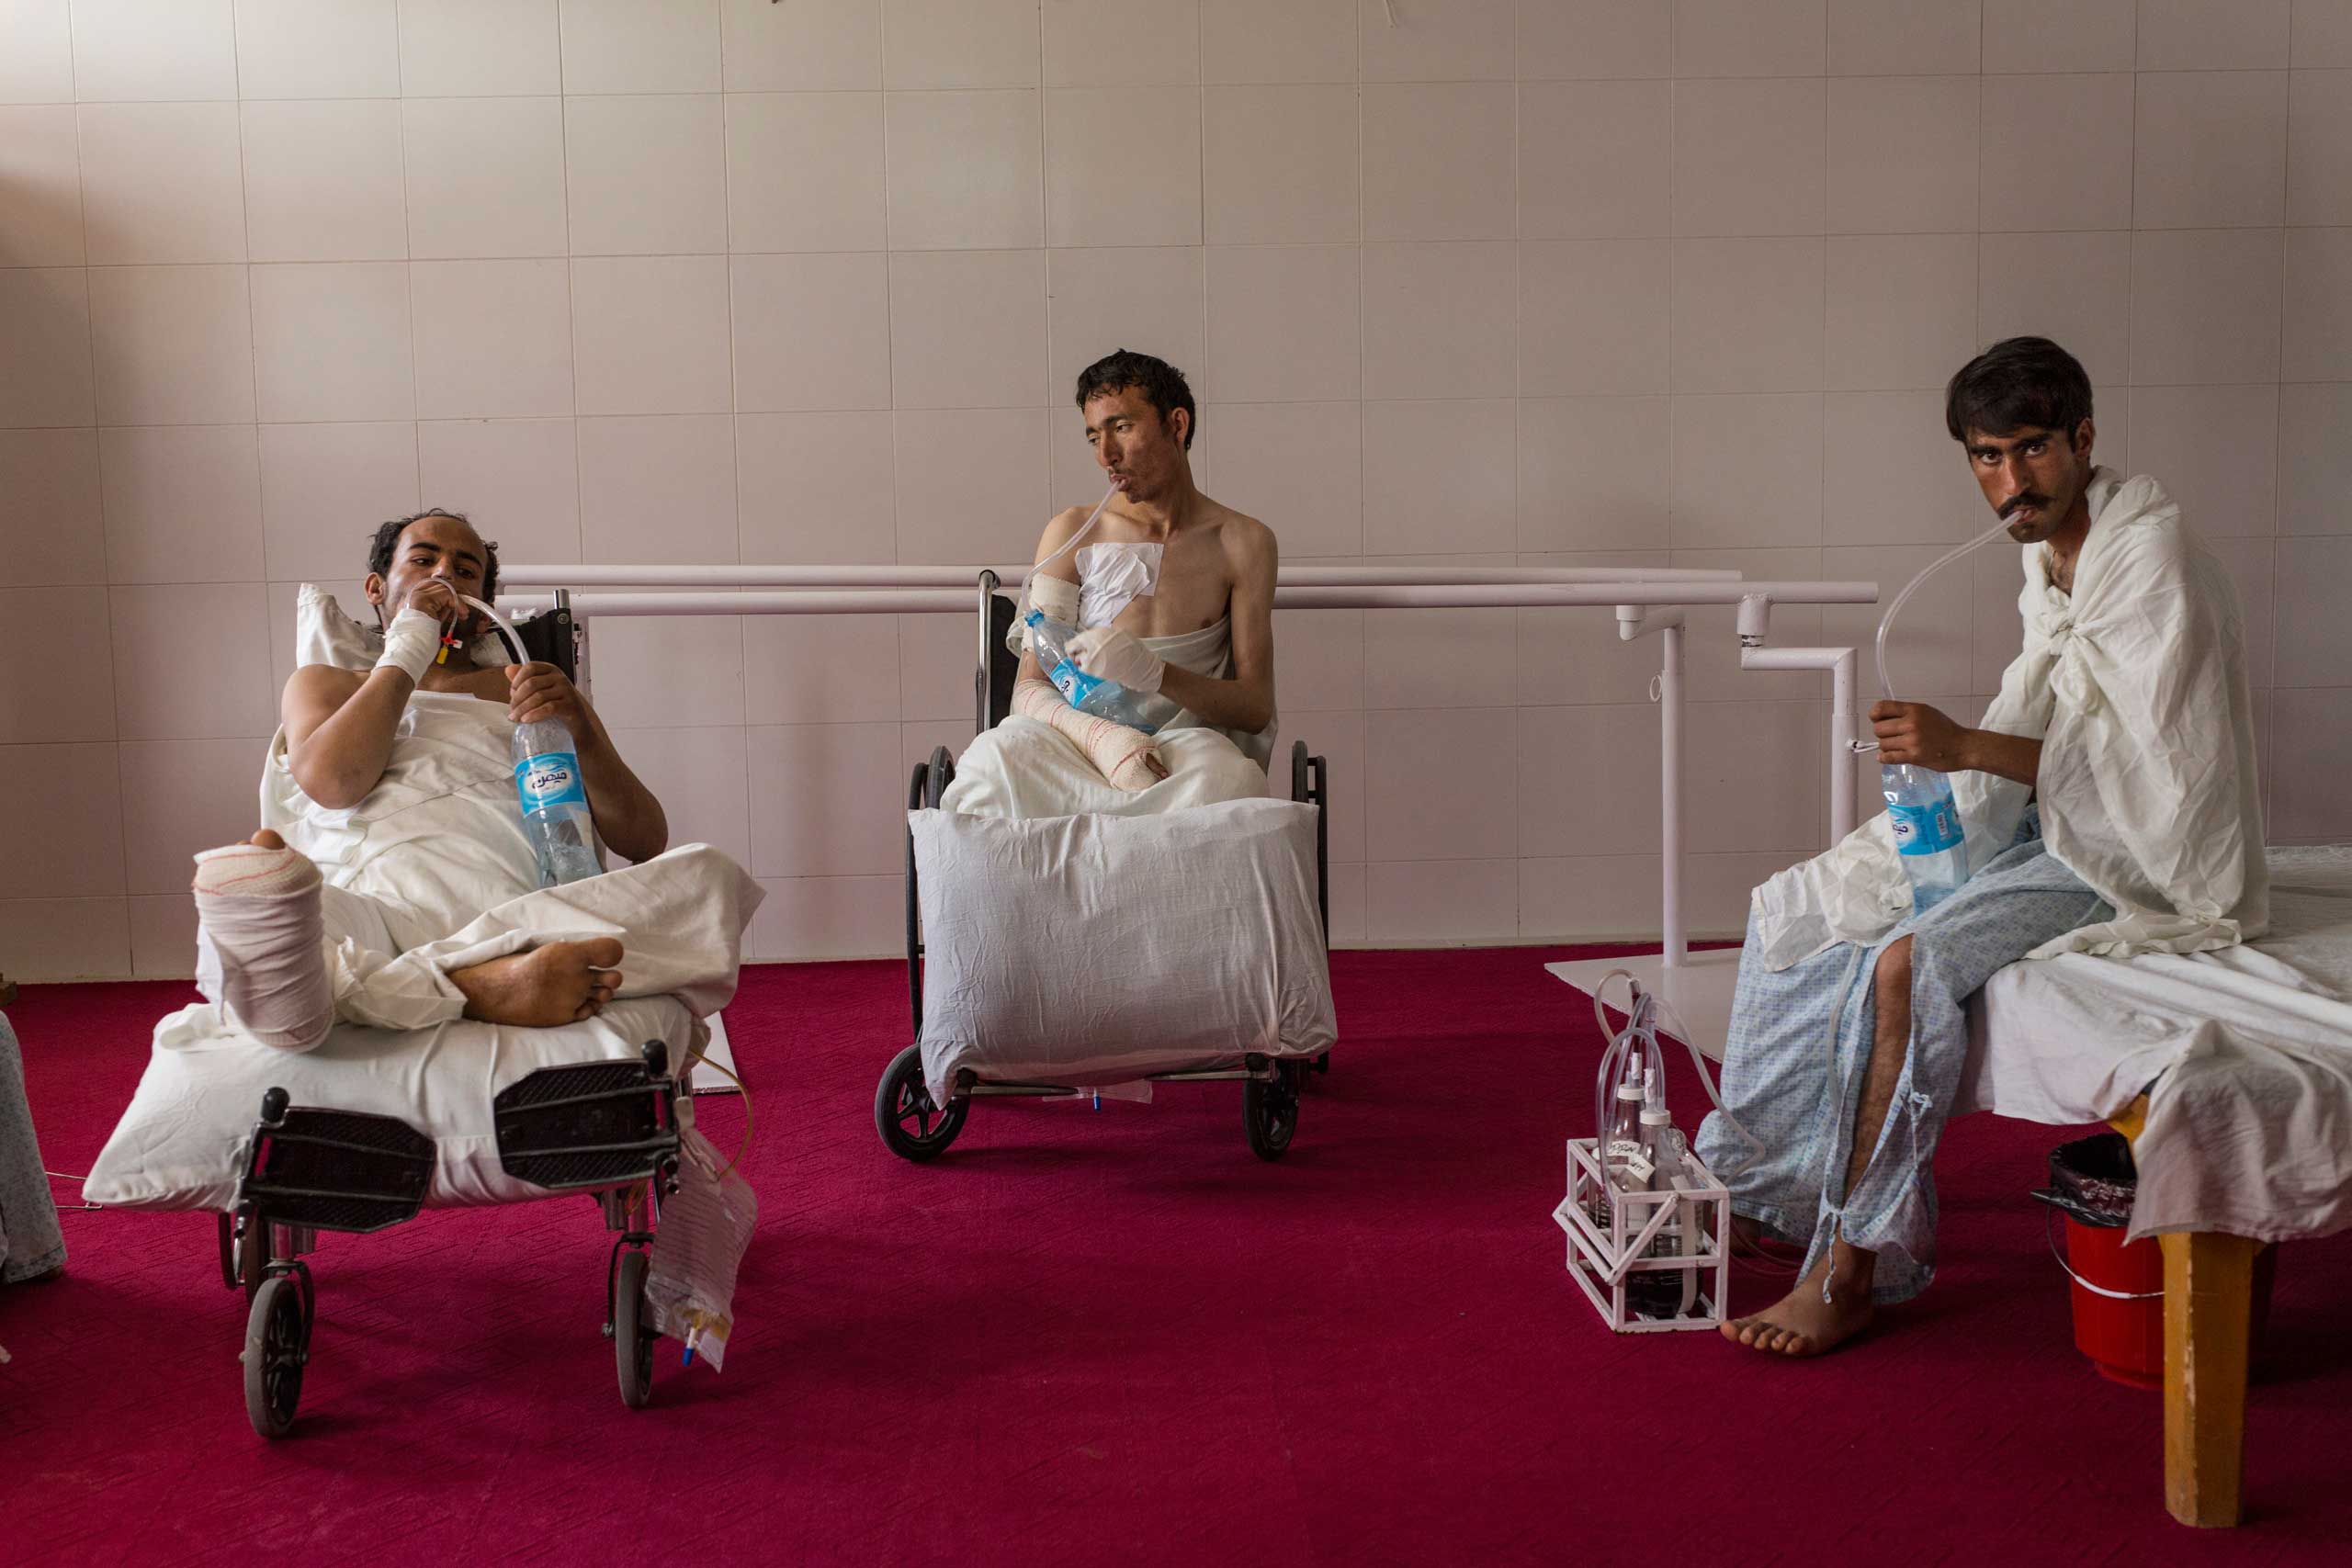 Patients with chest injuries strengthen their lung capacity with water bottles in the physical therapy room at the Emergency hospital in Lashkar Gah, Afghanistan on March 27, 2015.